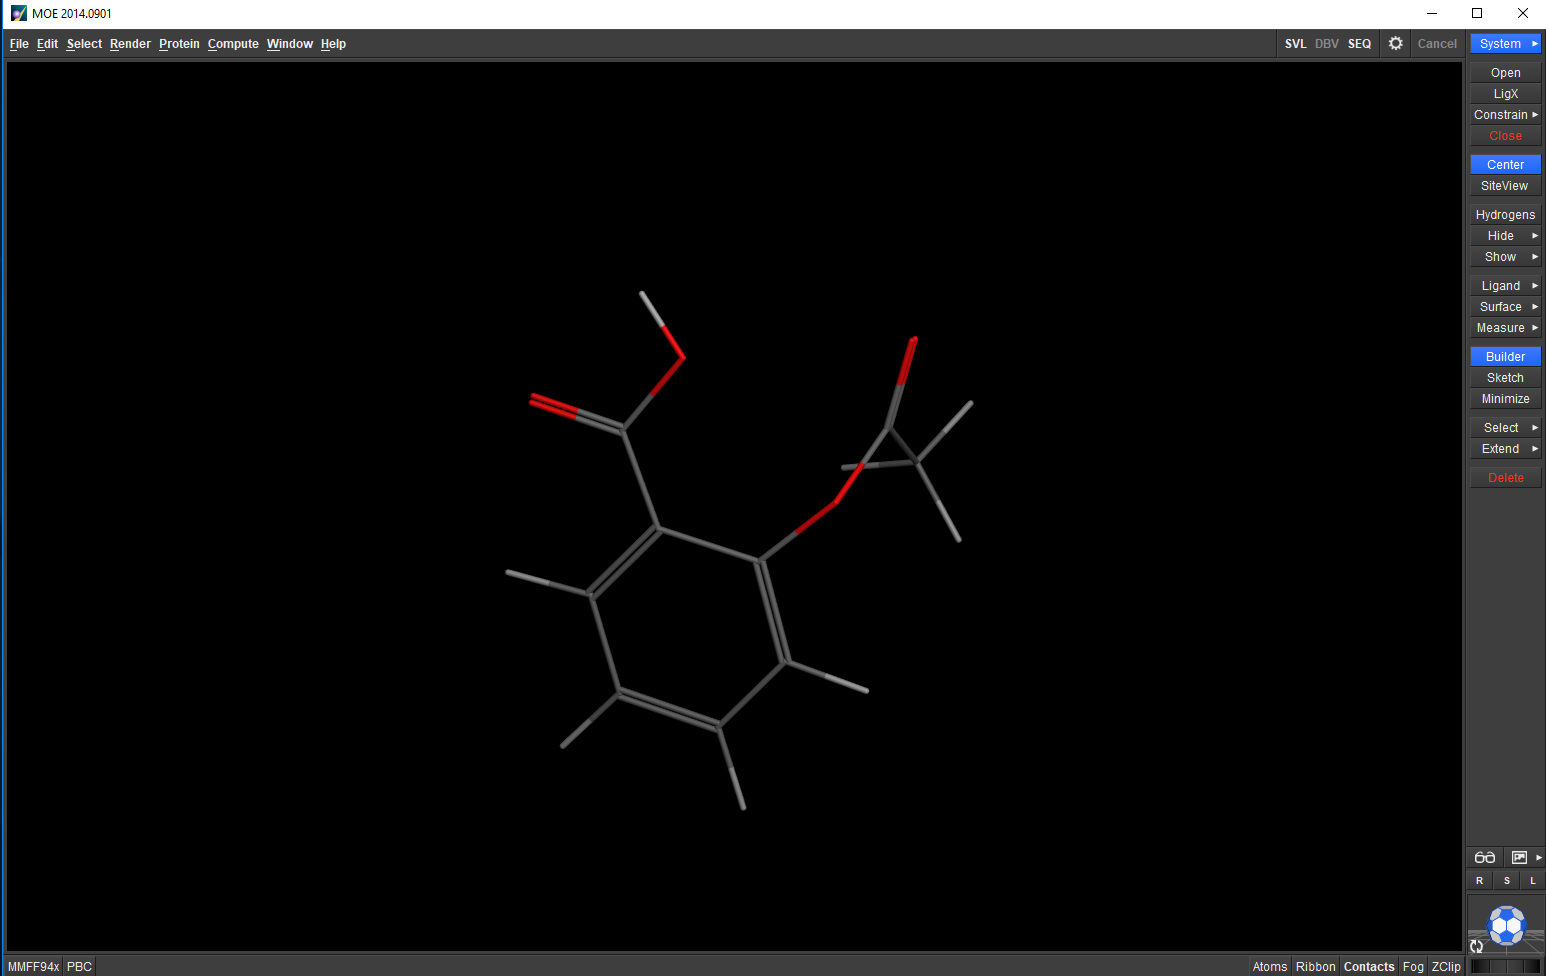 Working with Molecular Operating Environment (MOE) 2014.0901 full